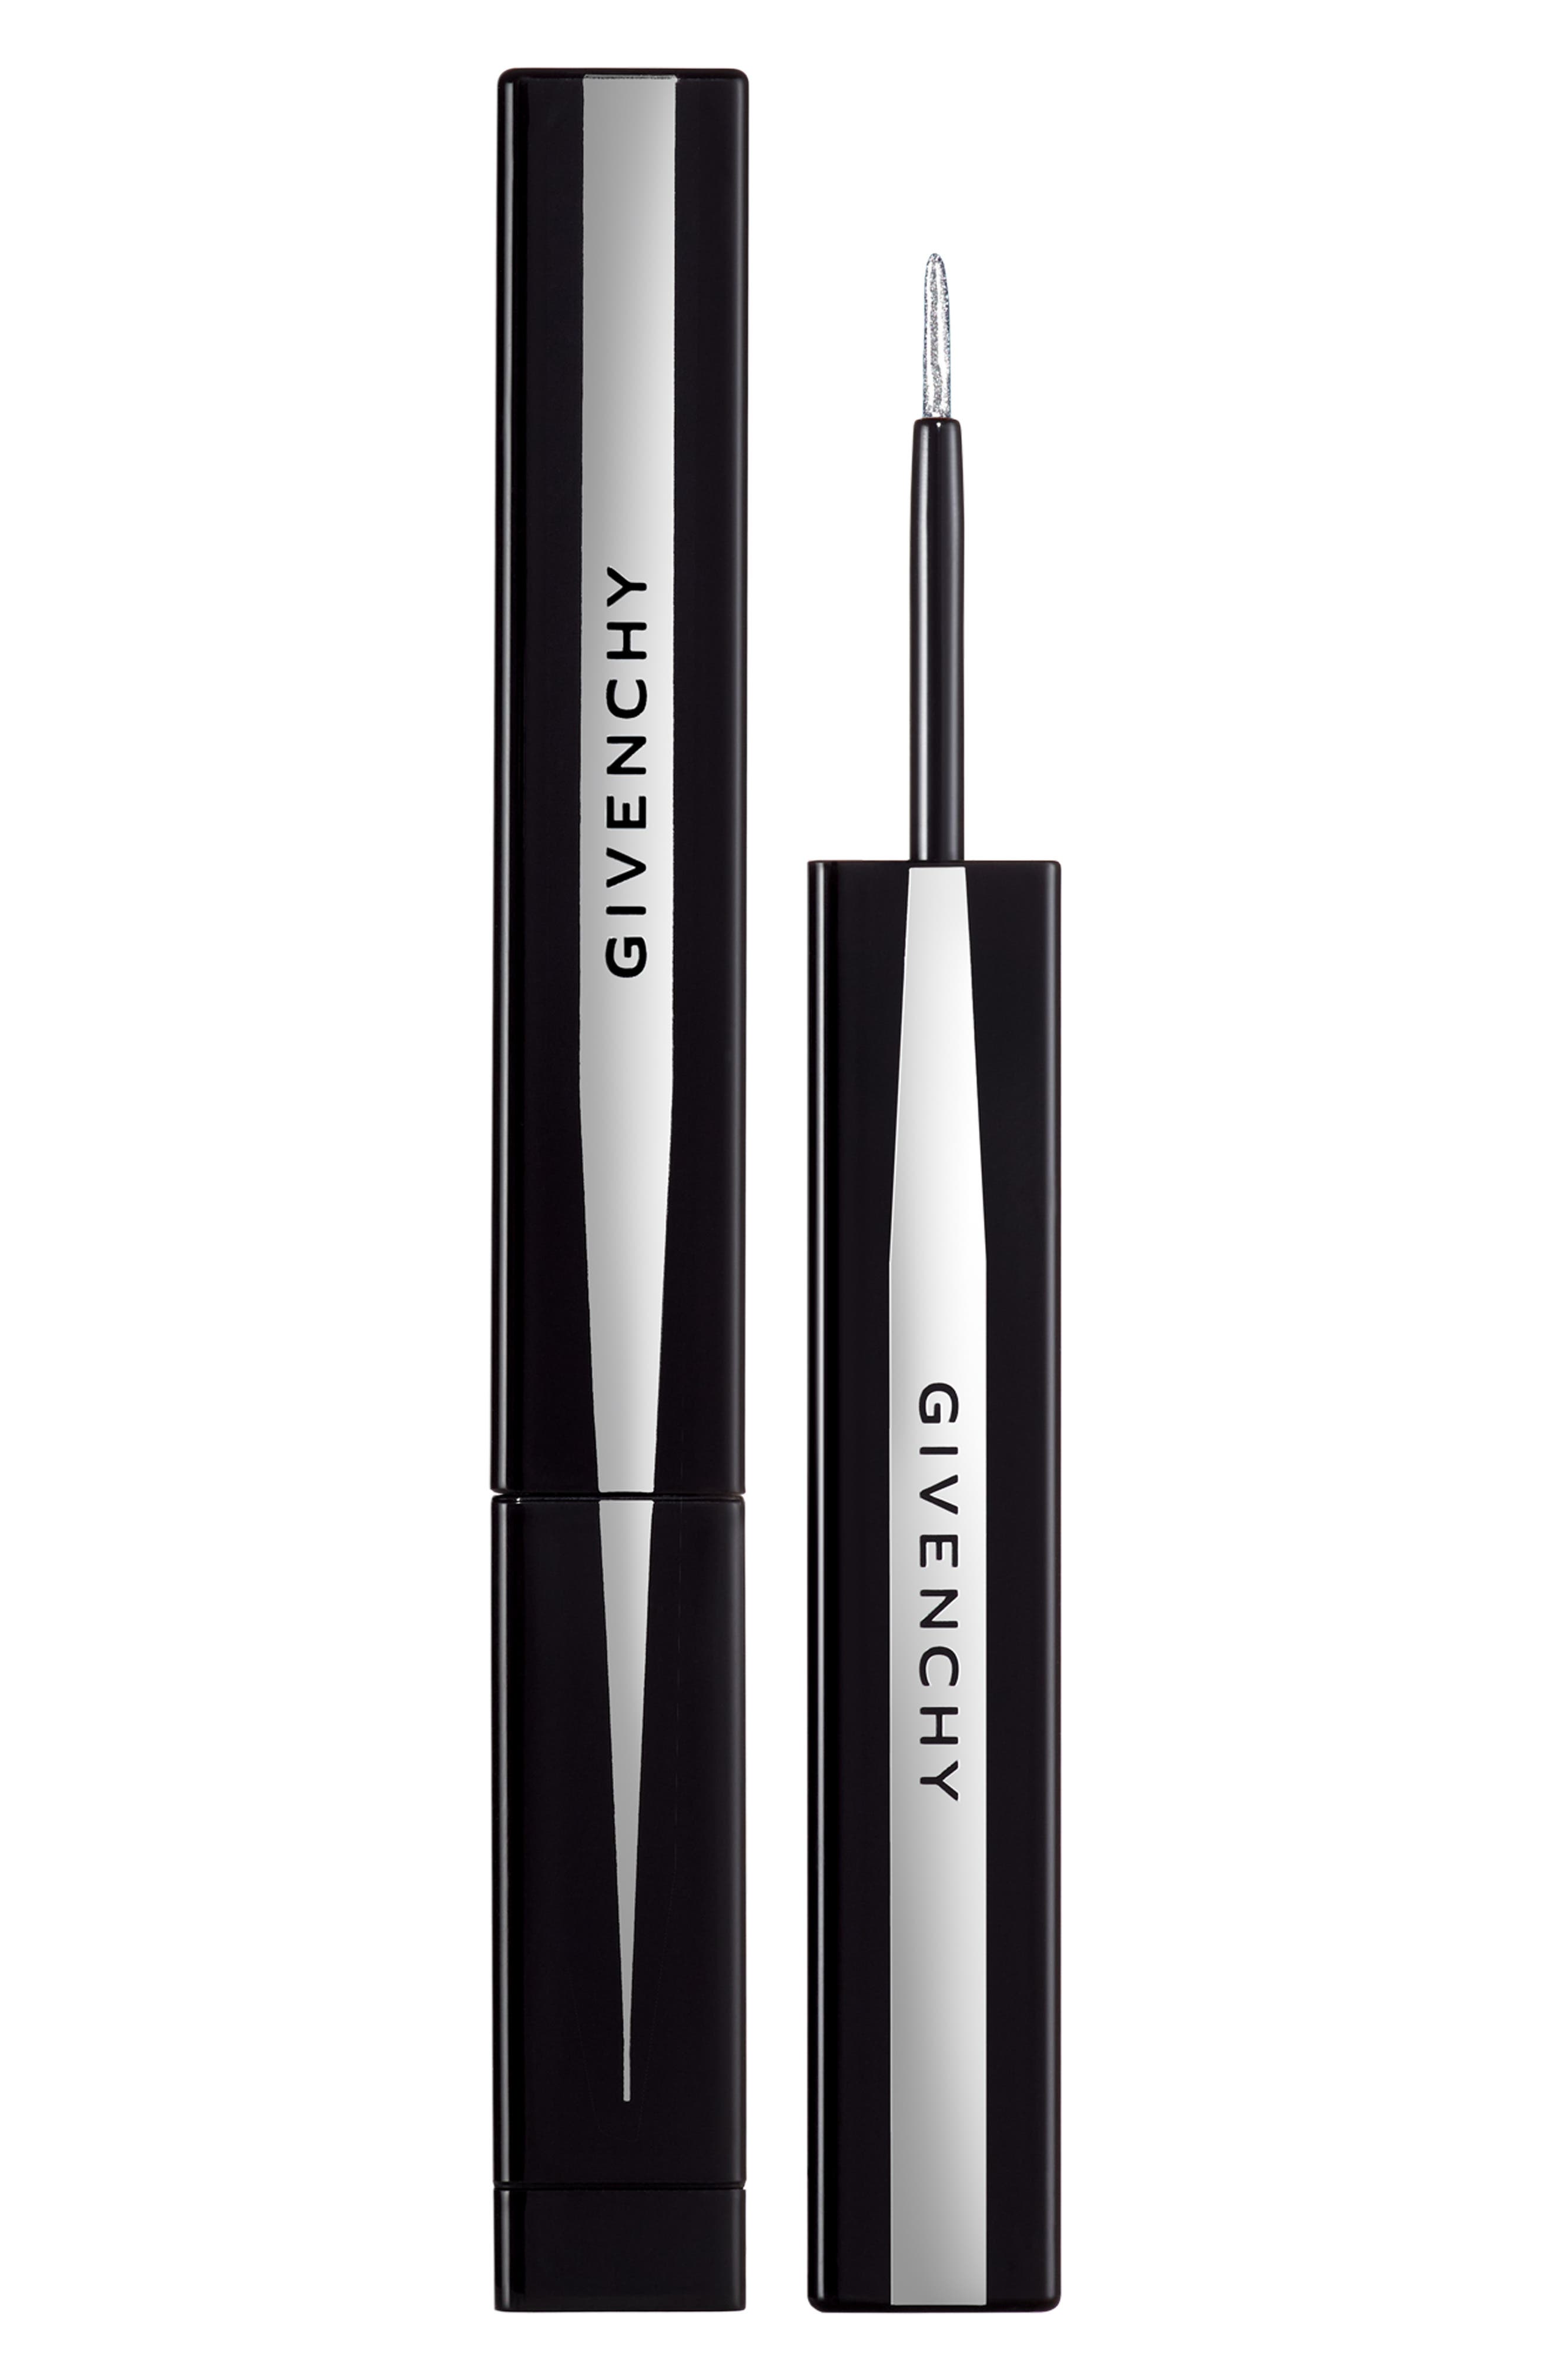 EAN 3274872385085 product image for Givenchy Phenomen'eyes Brush Eyeliner in 1 Silver at Nordstrom | upcitemdb.com